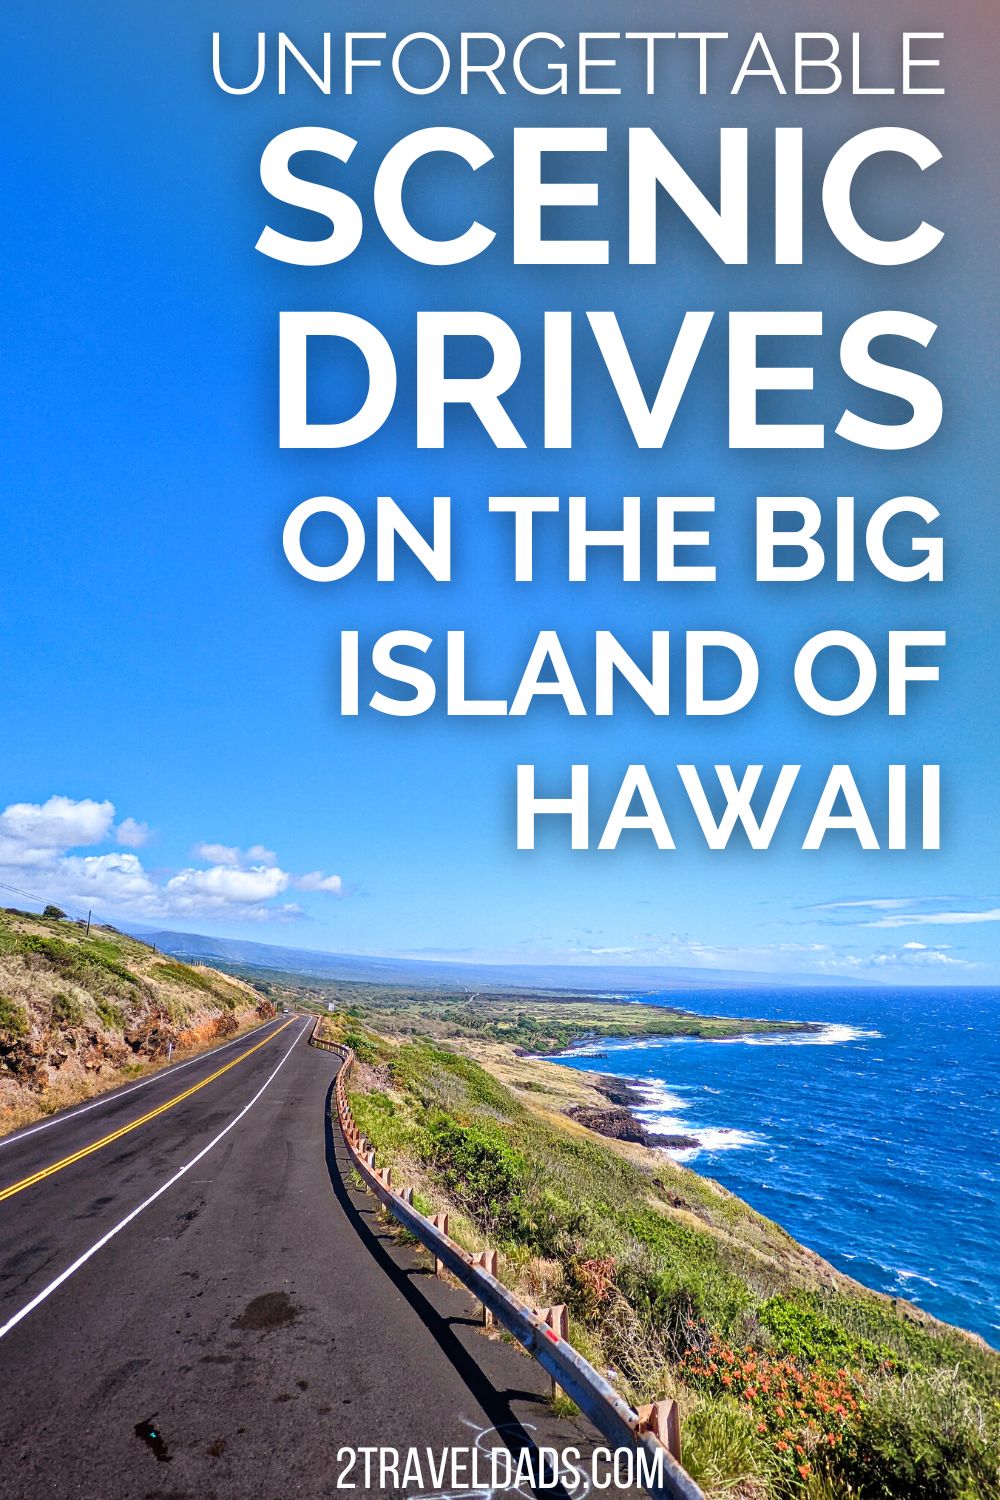 These Scenic Drives on the Big Island of Hawaii are not to be missed. Take in the best sights of the island, including Hawaii Volcanoes National Park, the Waipio Valley and the Kona Coast. Top picks for road trip stops and views of the Big Island.